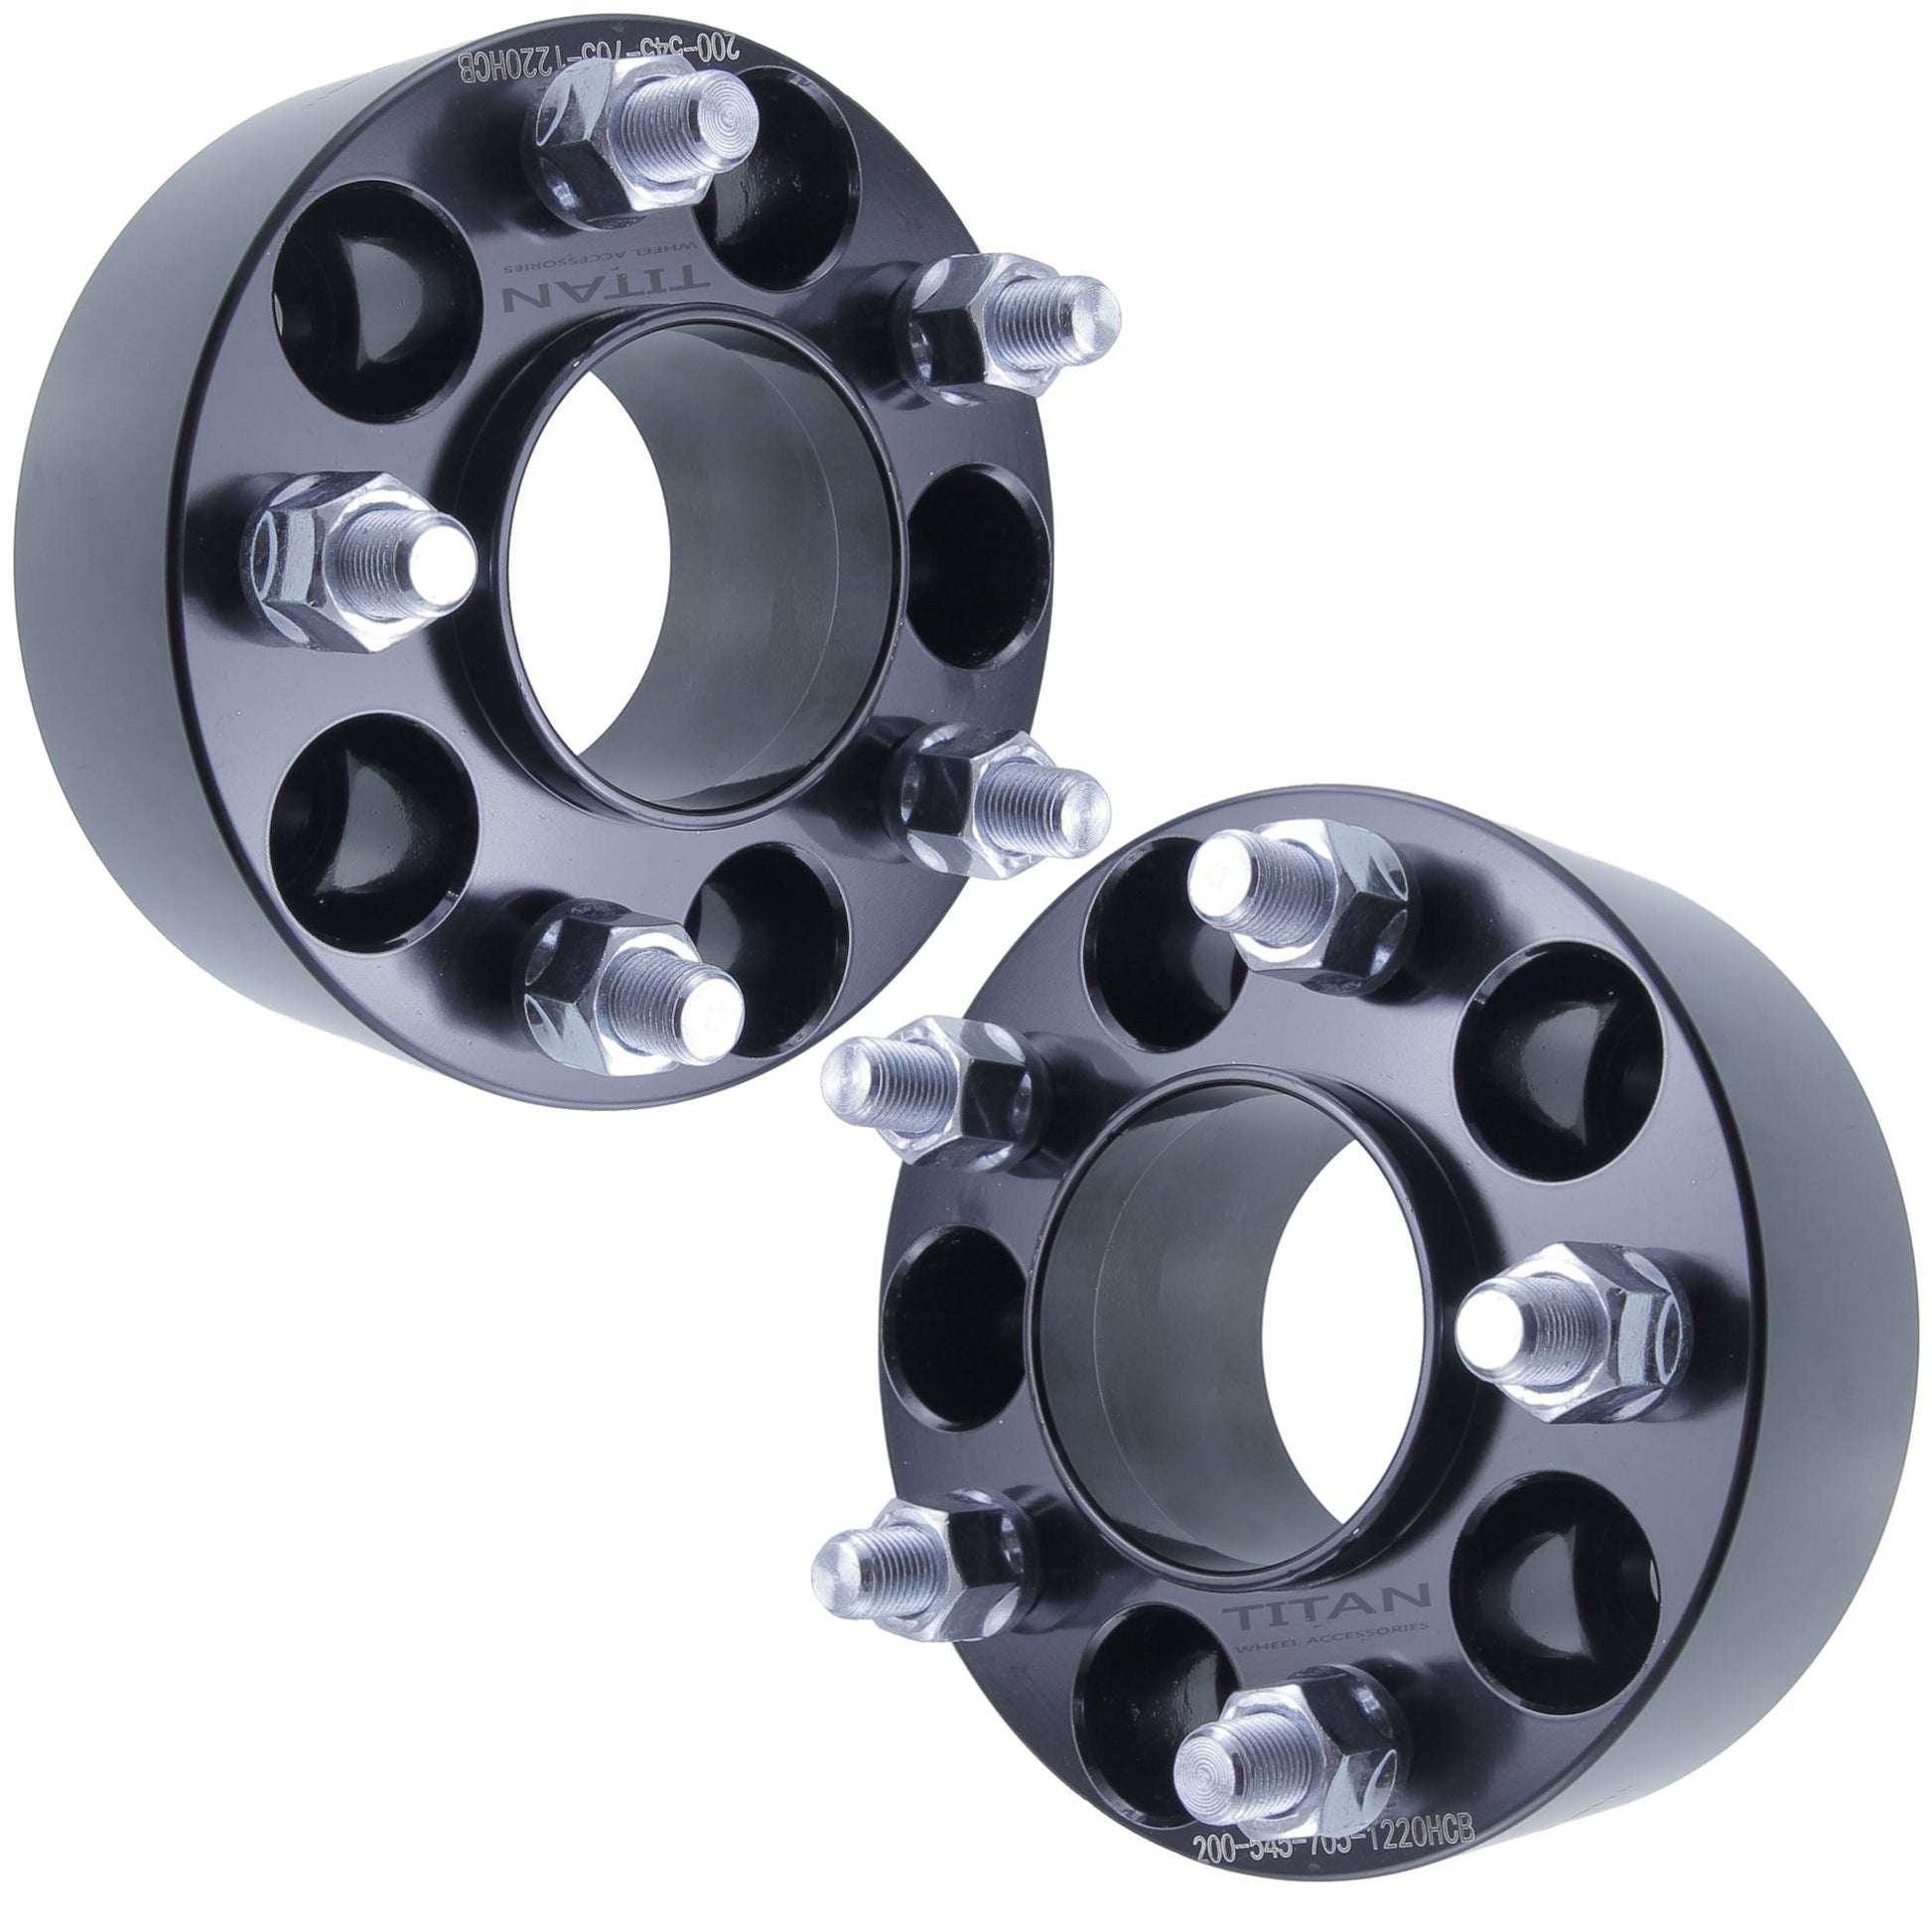 2" (50mm) Titan Wheel Spacers for Ford Mustang Ranger Explorer Edge | 5x4.5 (5x114.3) | 70.5 Hubcentric |1/2x20 Studs |  Set of 4 | Titan Wheel Accessories